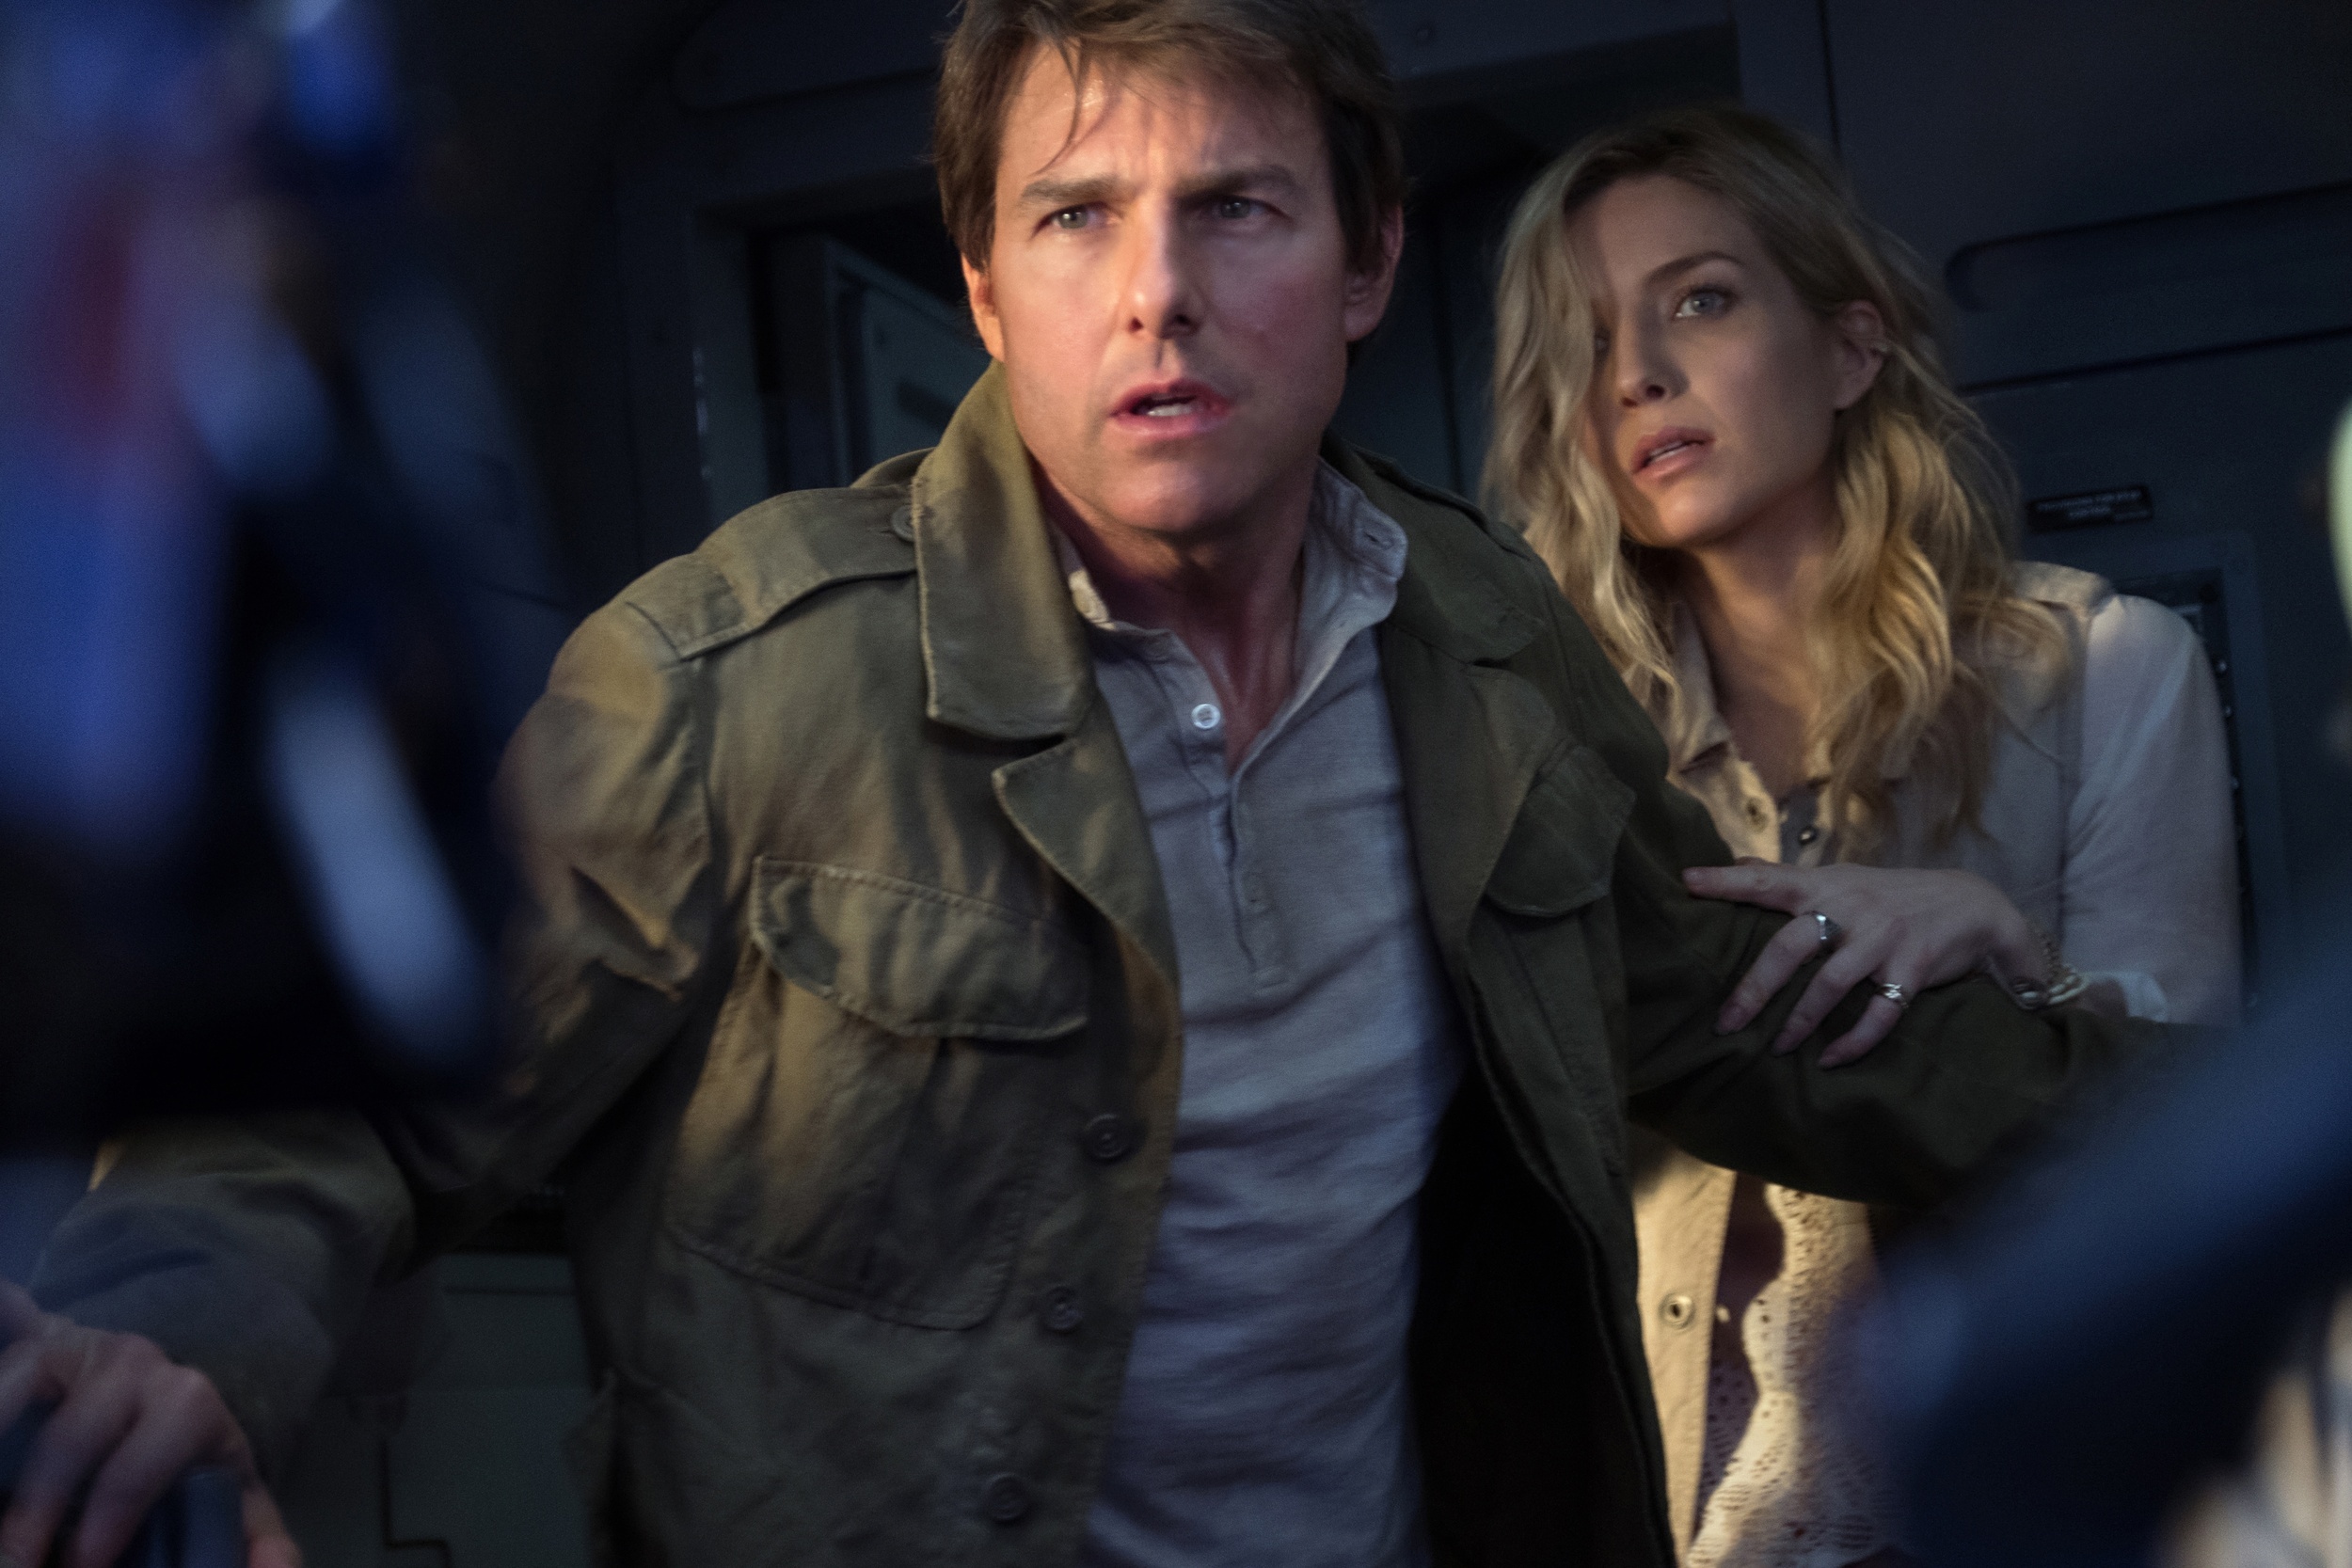 <p>Universal decided to go back to the <em>Mummy</em> well in 2017. This time, Cruise was available to play the lead. The plan was for Cruise and <em>The Mummy </em>to be part of a connected series of films called the <em>Dark Universe</em>. This adaptation proved to be a disappointment, though, and the idea of the shared film universe was scrapped.</p><p><a href='https://www.msn.com/en-us/community/channel/vid-cj9pqbr0vn9in2b6ddcd8sfgpfq6x6utp44fssrv6mc2gtybw0us'>Did you enjoy this slideshow? Follow us on MSN to see more of our exclusive entertainment content.</a></p>